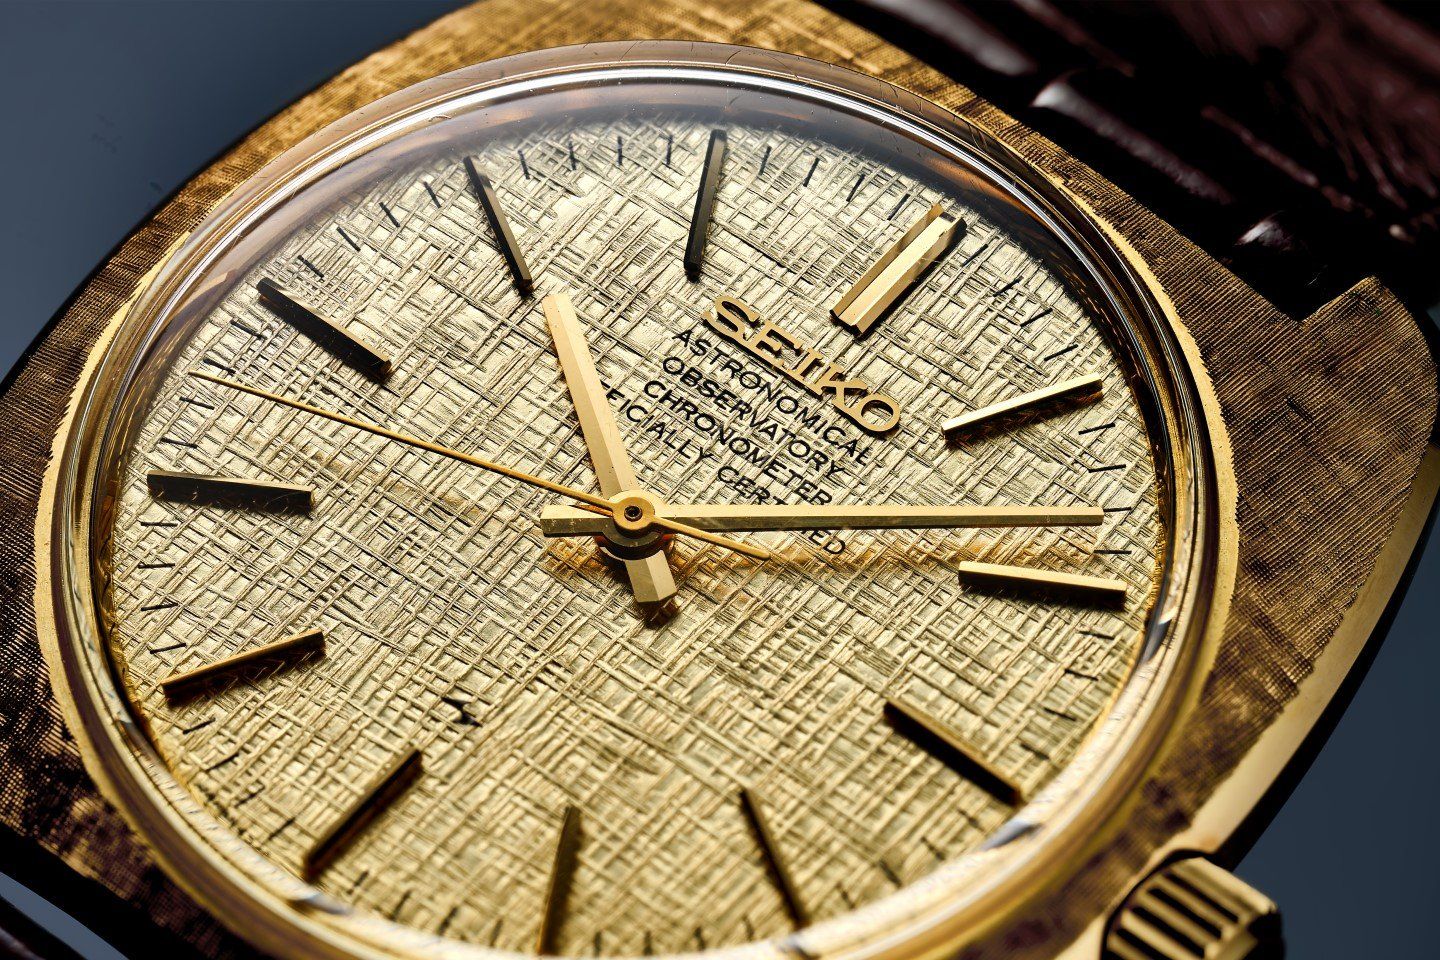 The newly acquired 1969 Observatory Certified Chronometer